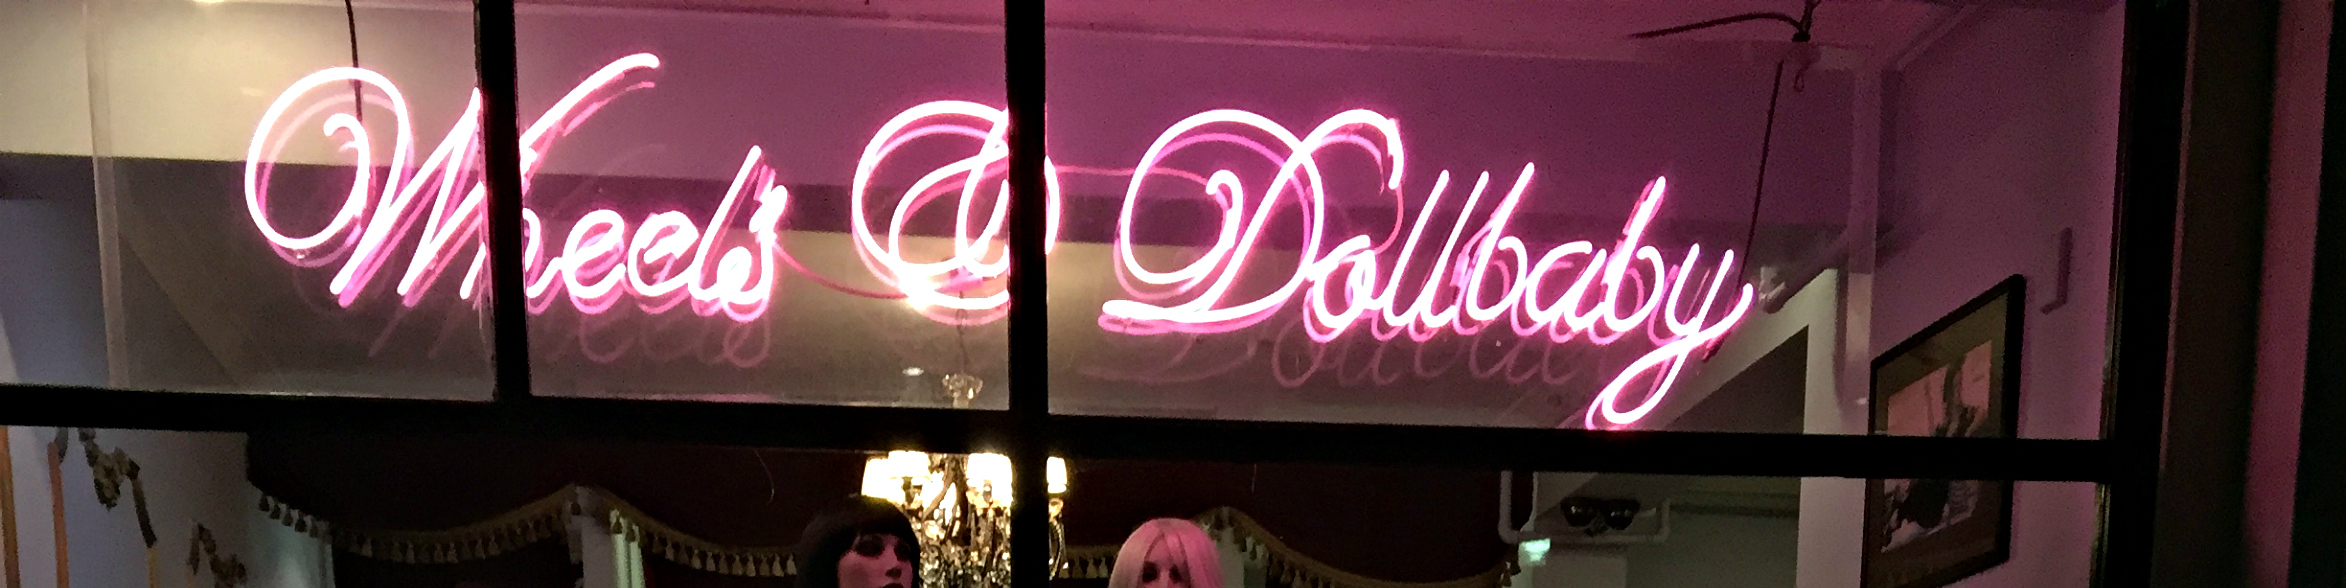 wheels and dollbaby sign